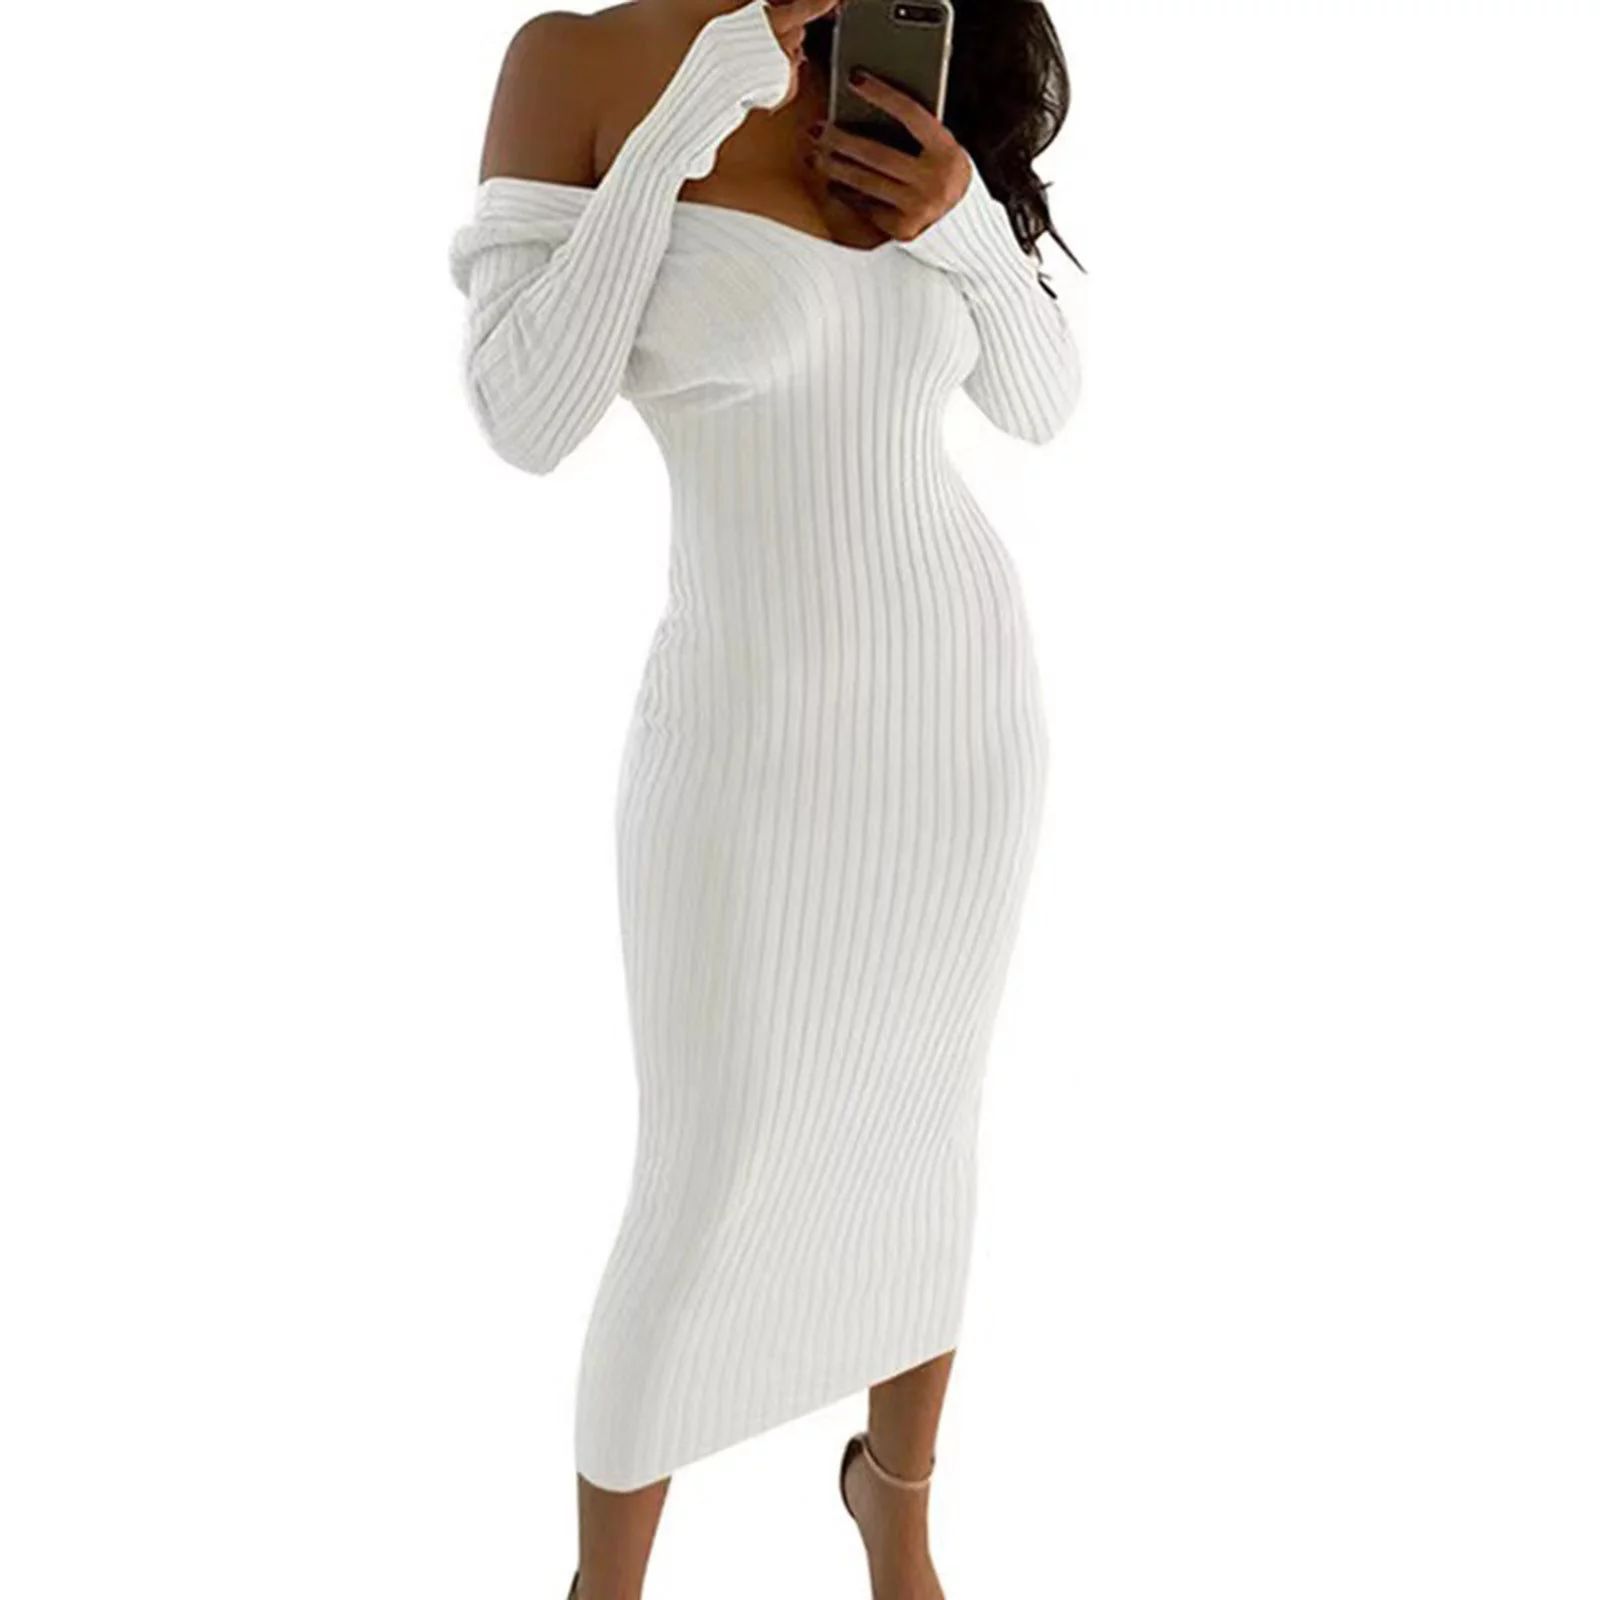 Outfmvch Sexy Dress For Women Off The Shoulder Long Sleeve Ribbed Knit Midi Dress White S - Walma... | Walmart (US)